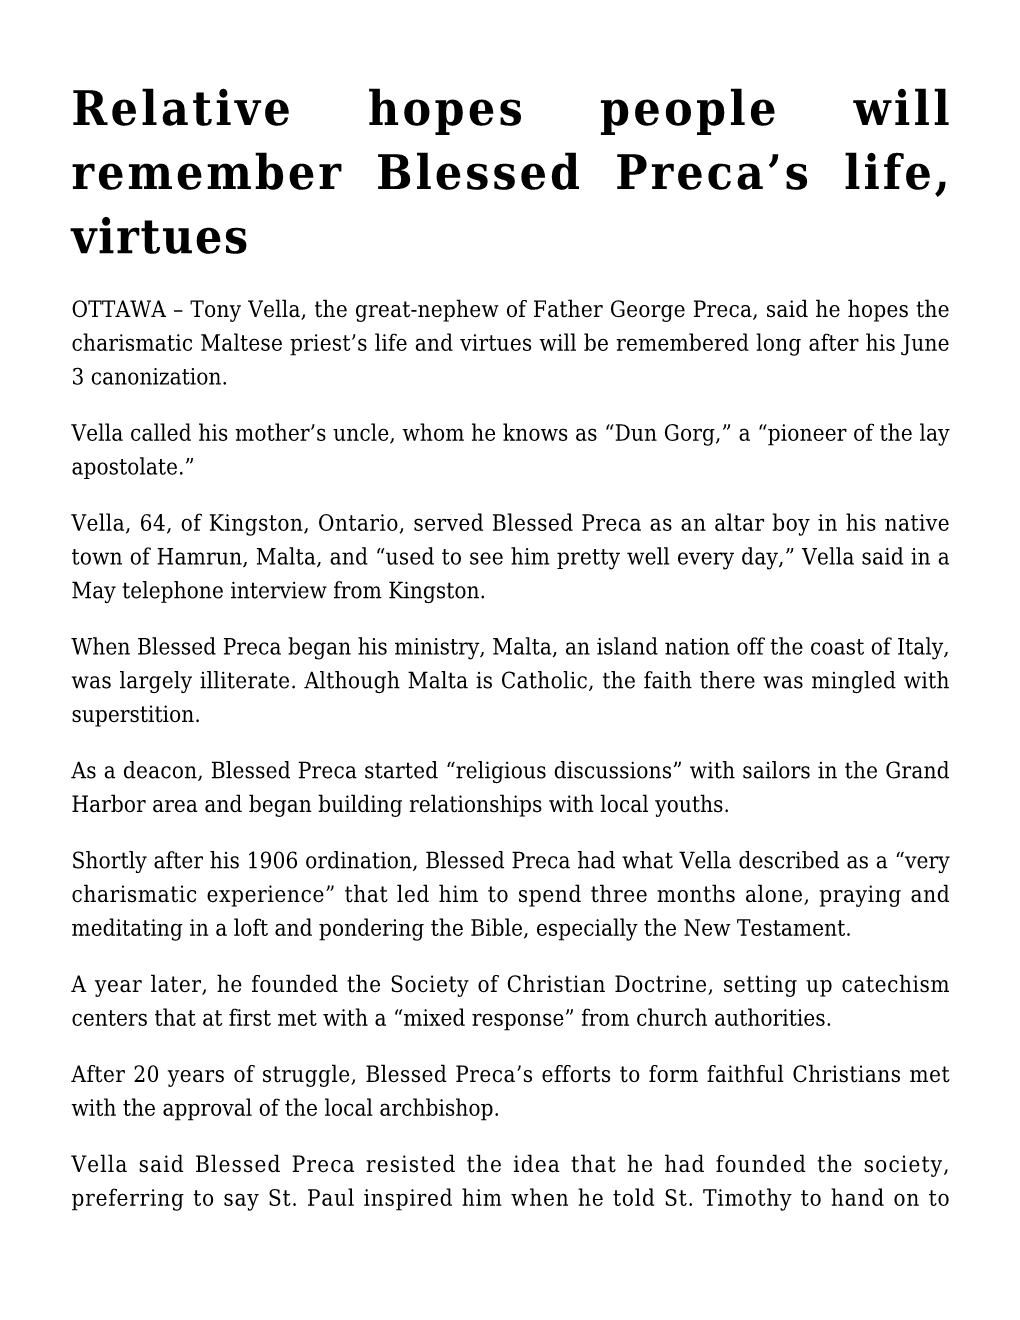 Relative Hopes People Will Remember Blessed Preca's Life, Virtues